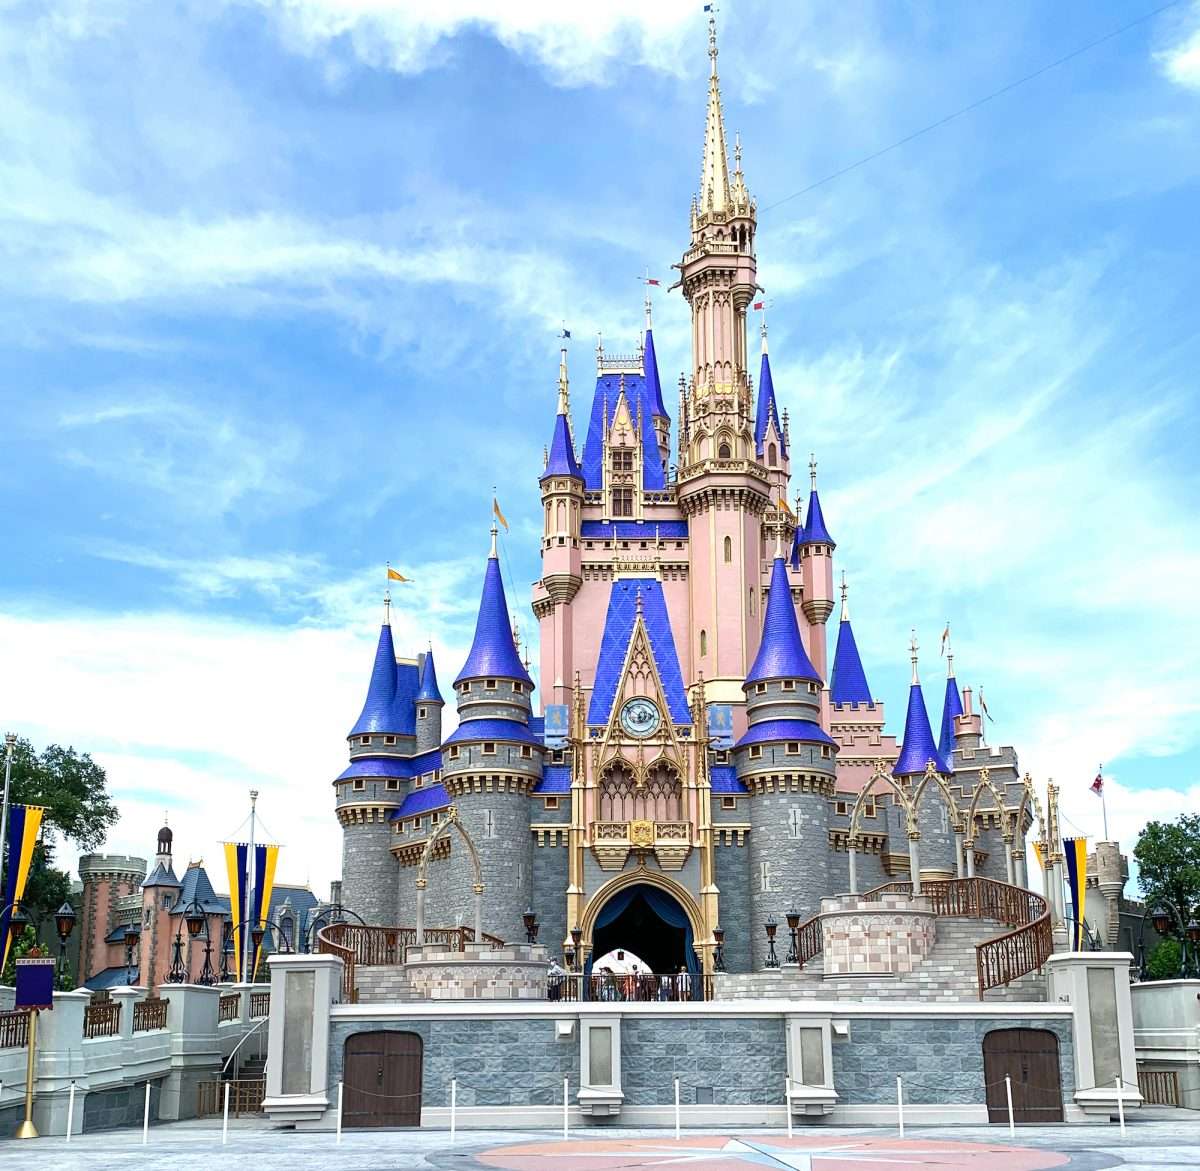 Reopening Day at Magic Kingdom After 3+ Month Closure